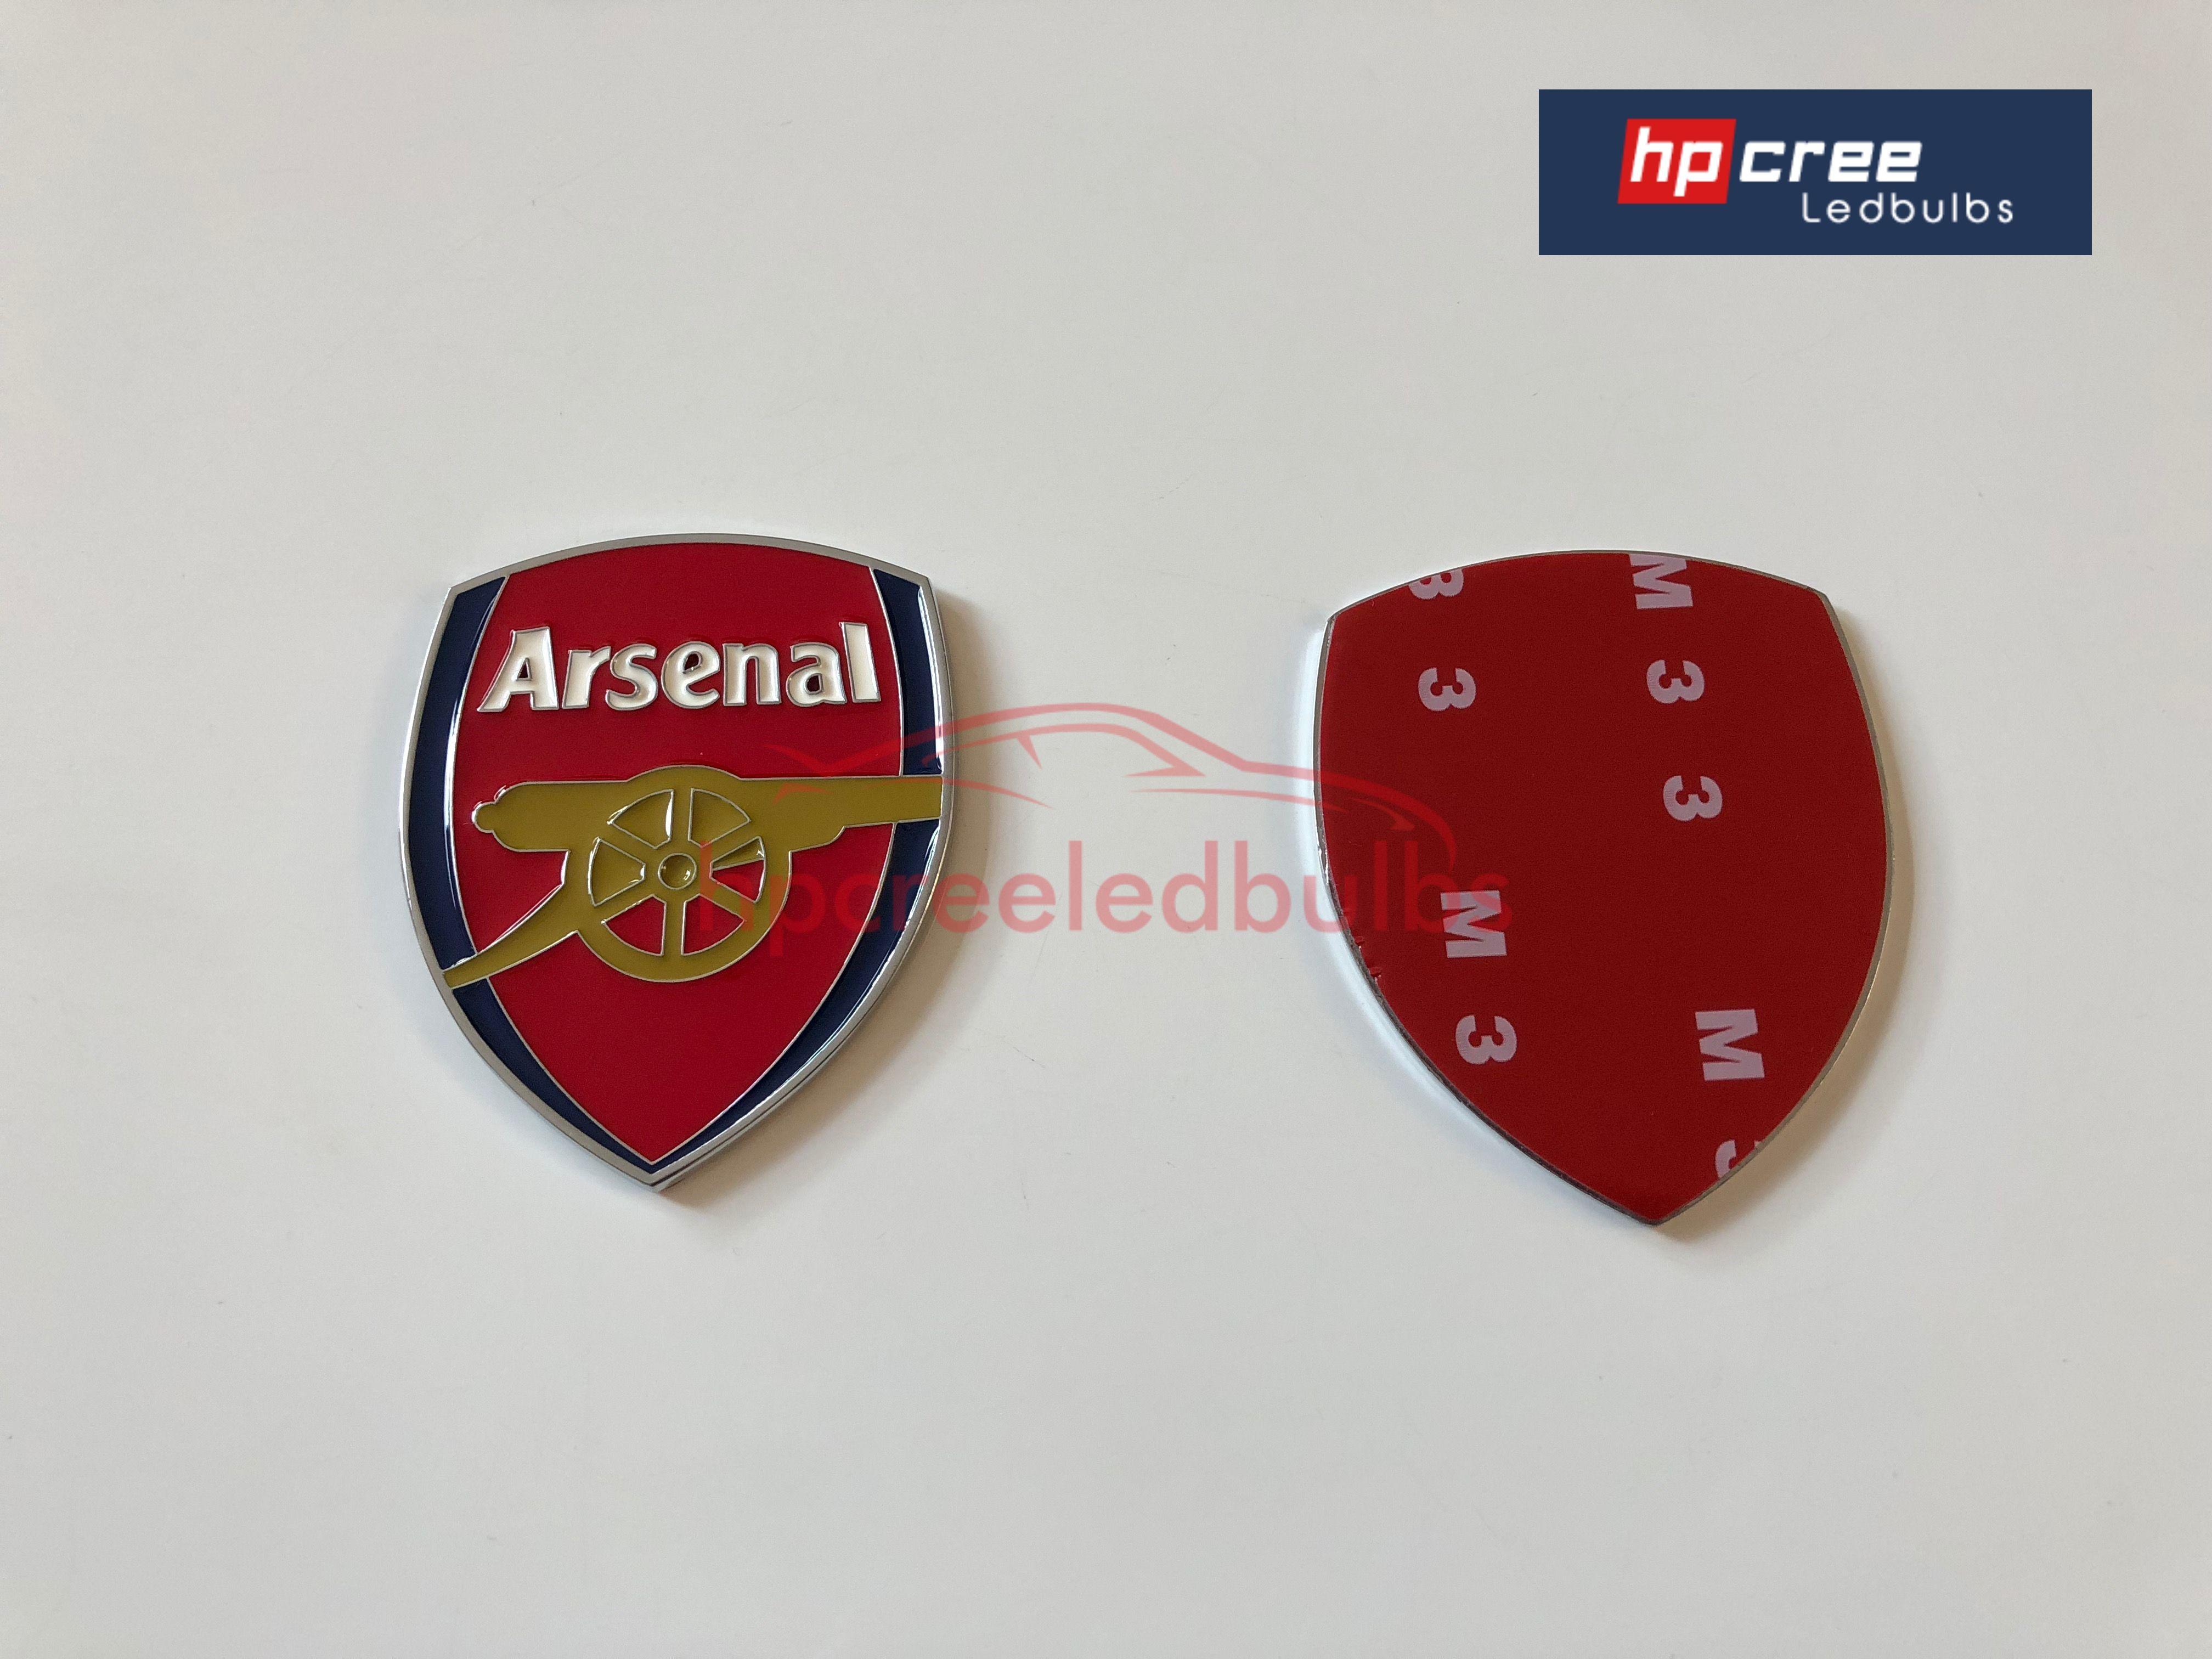 Gray 2018 Logo - NEW 2018 ARSENAL FC 3D METAL LOGO BADGE STICKER CAR STYLING AND ...